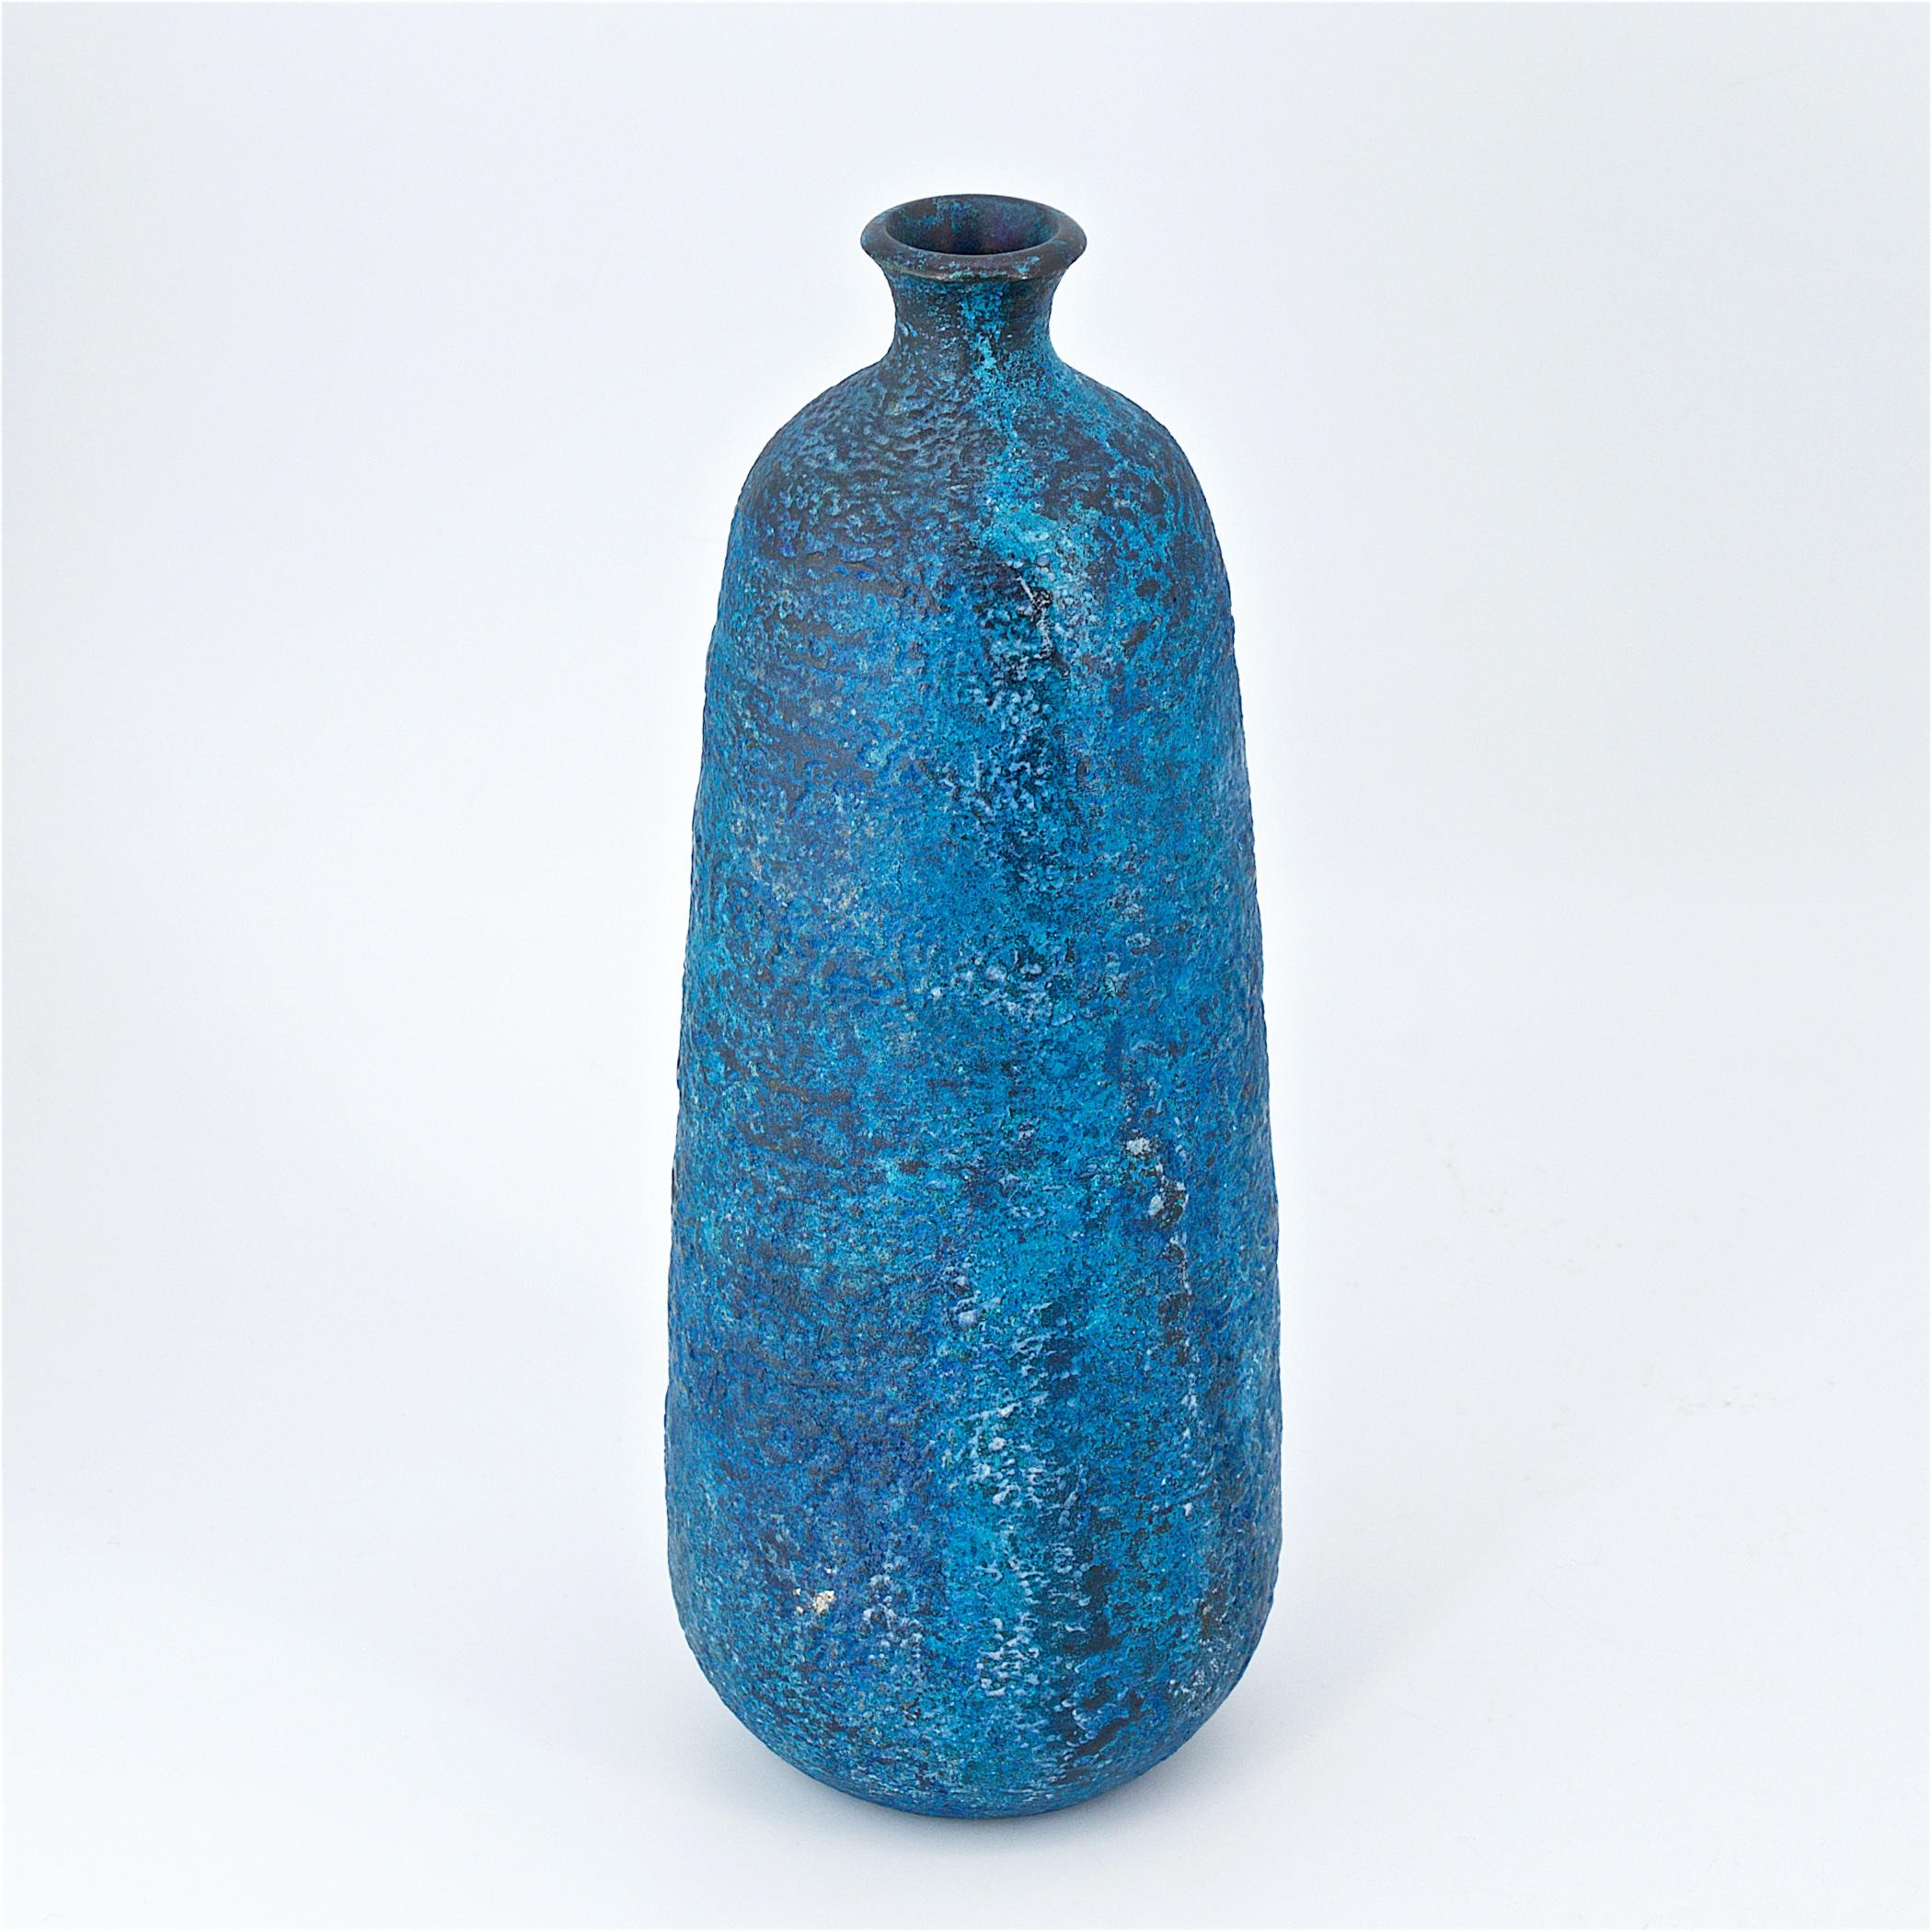 Spectacular Japanese vase. We have never had one quite like it! Super understated but with a vibrant blue glaze! Mottled or Volcanic textured enamel over Bronze. The glaze consists of; royal blue, cobalt blue, turquoise, black, and white. Very heavy